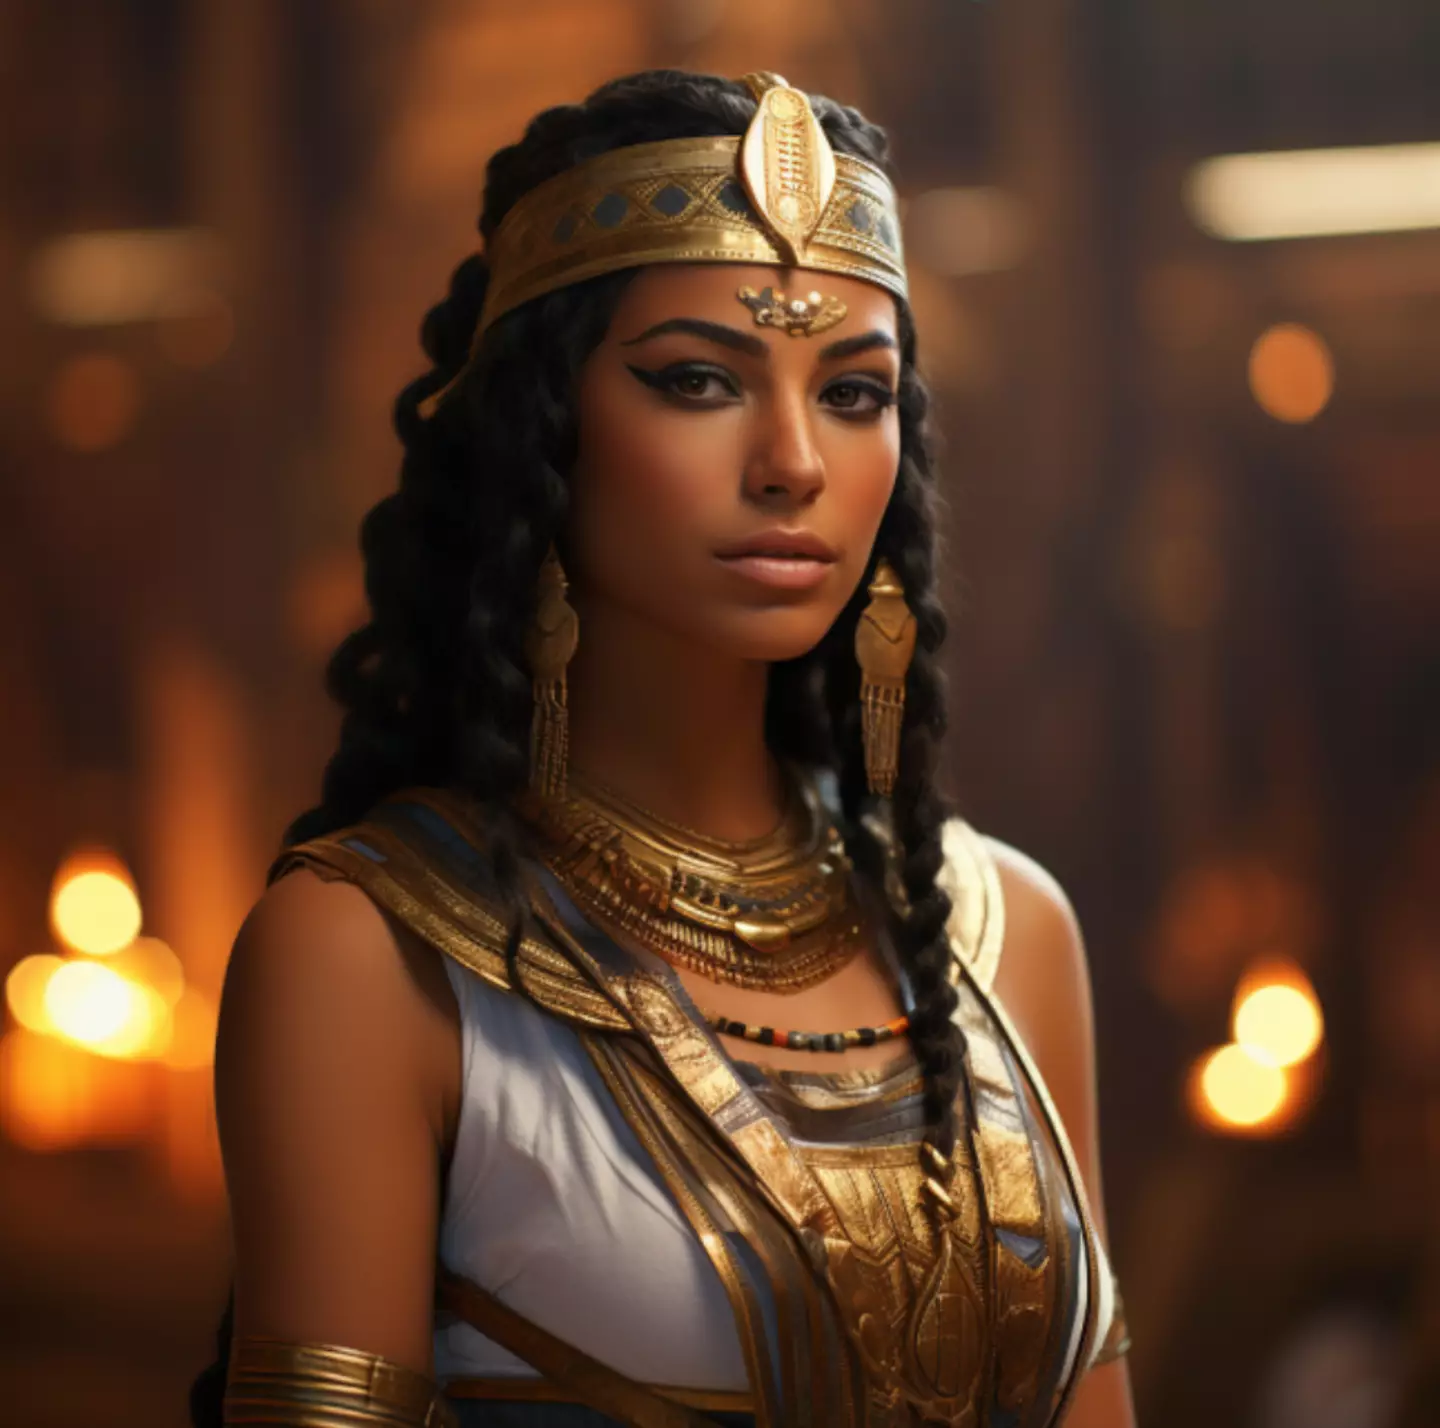 Cleopatra is often depicted as a beautiful queen.